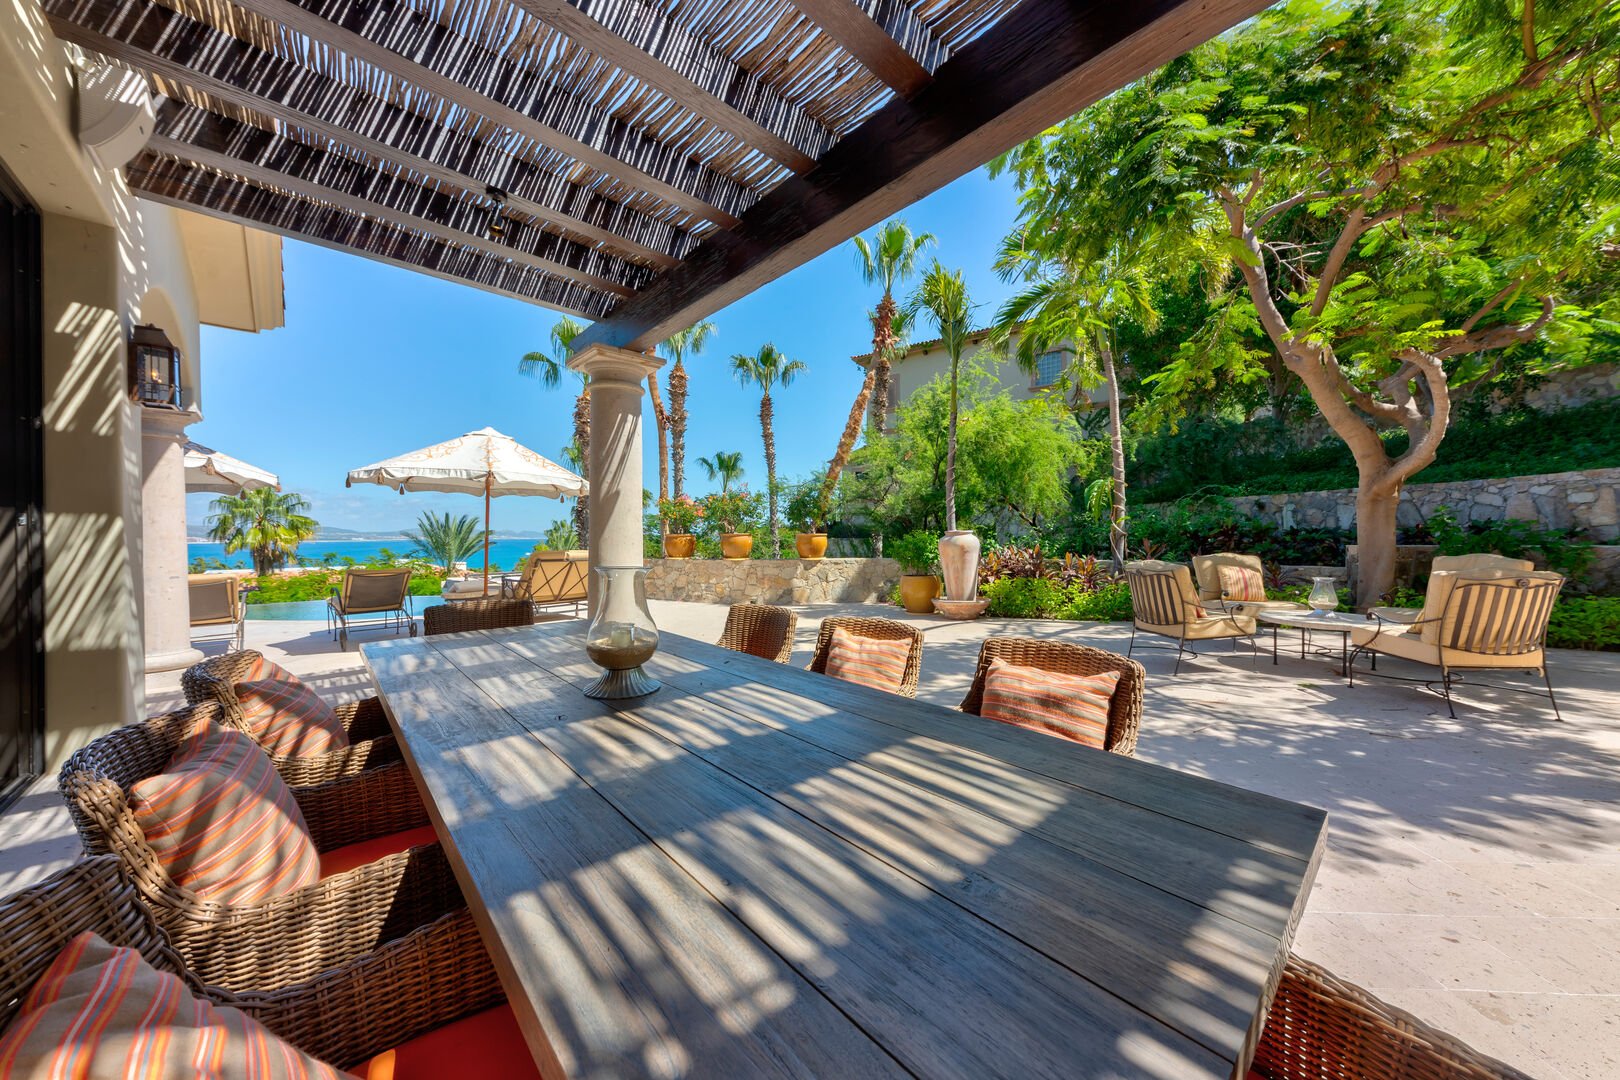 Outdoor seating beneath a pagoda outside of this Los Cabos getaway